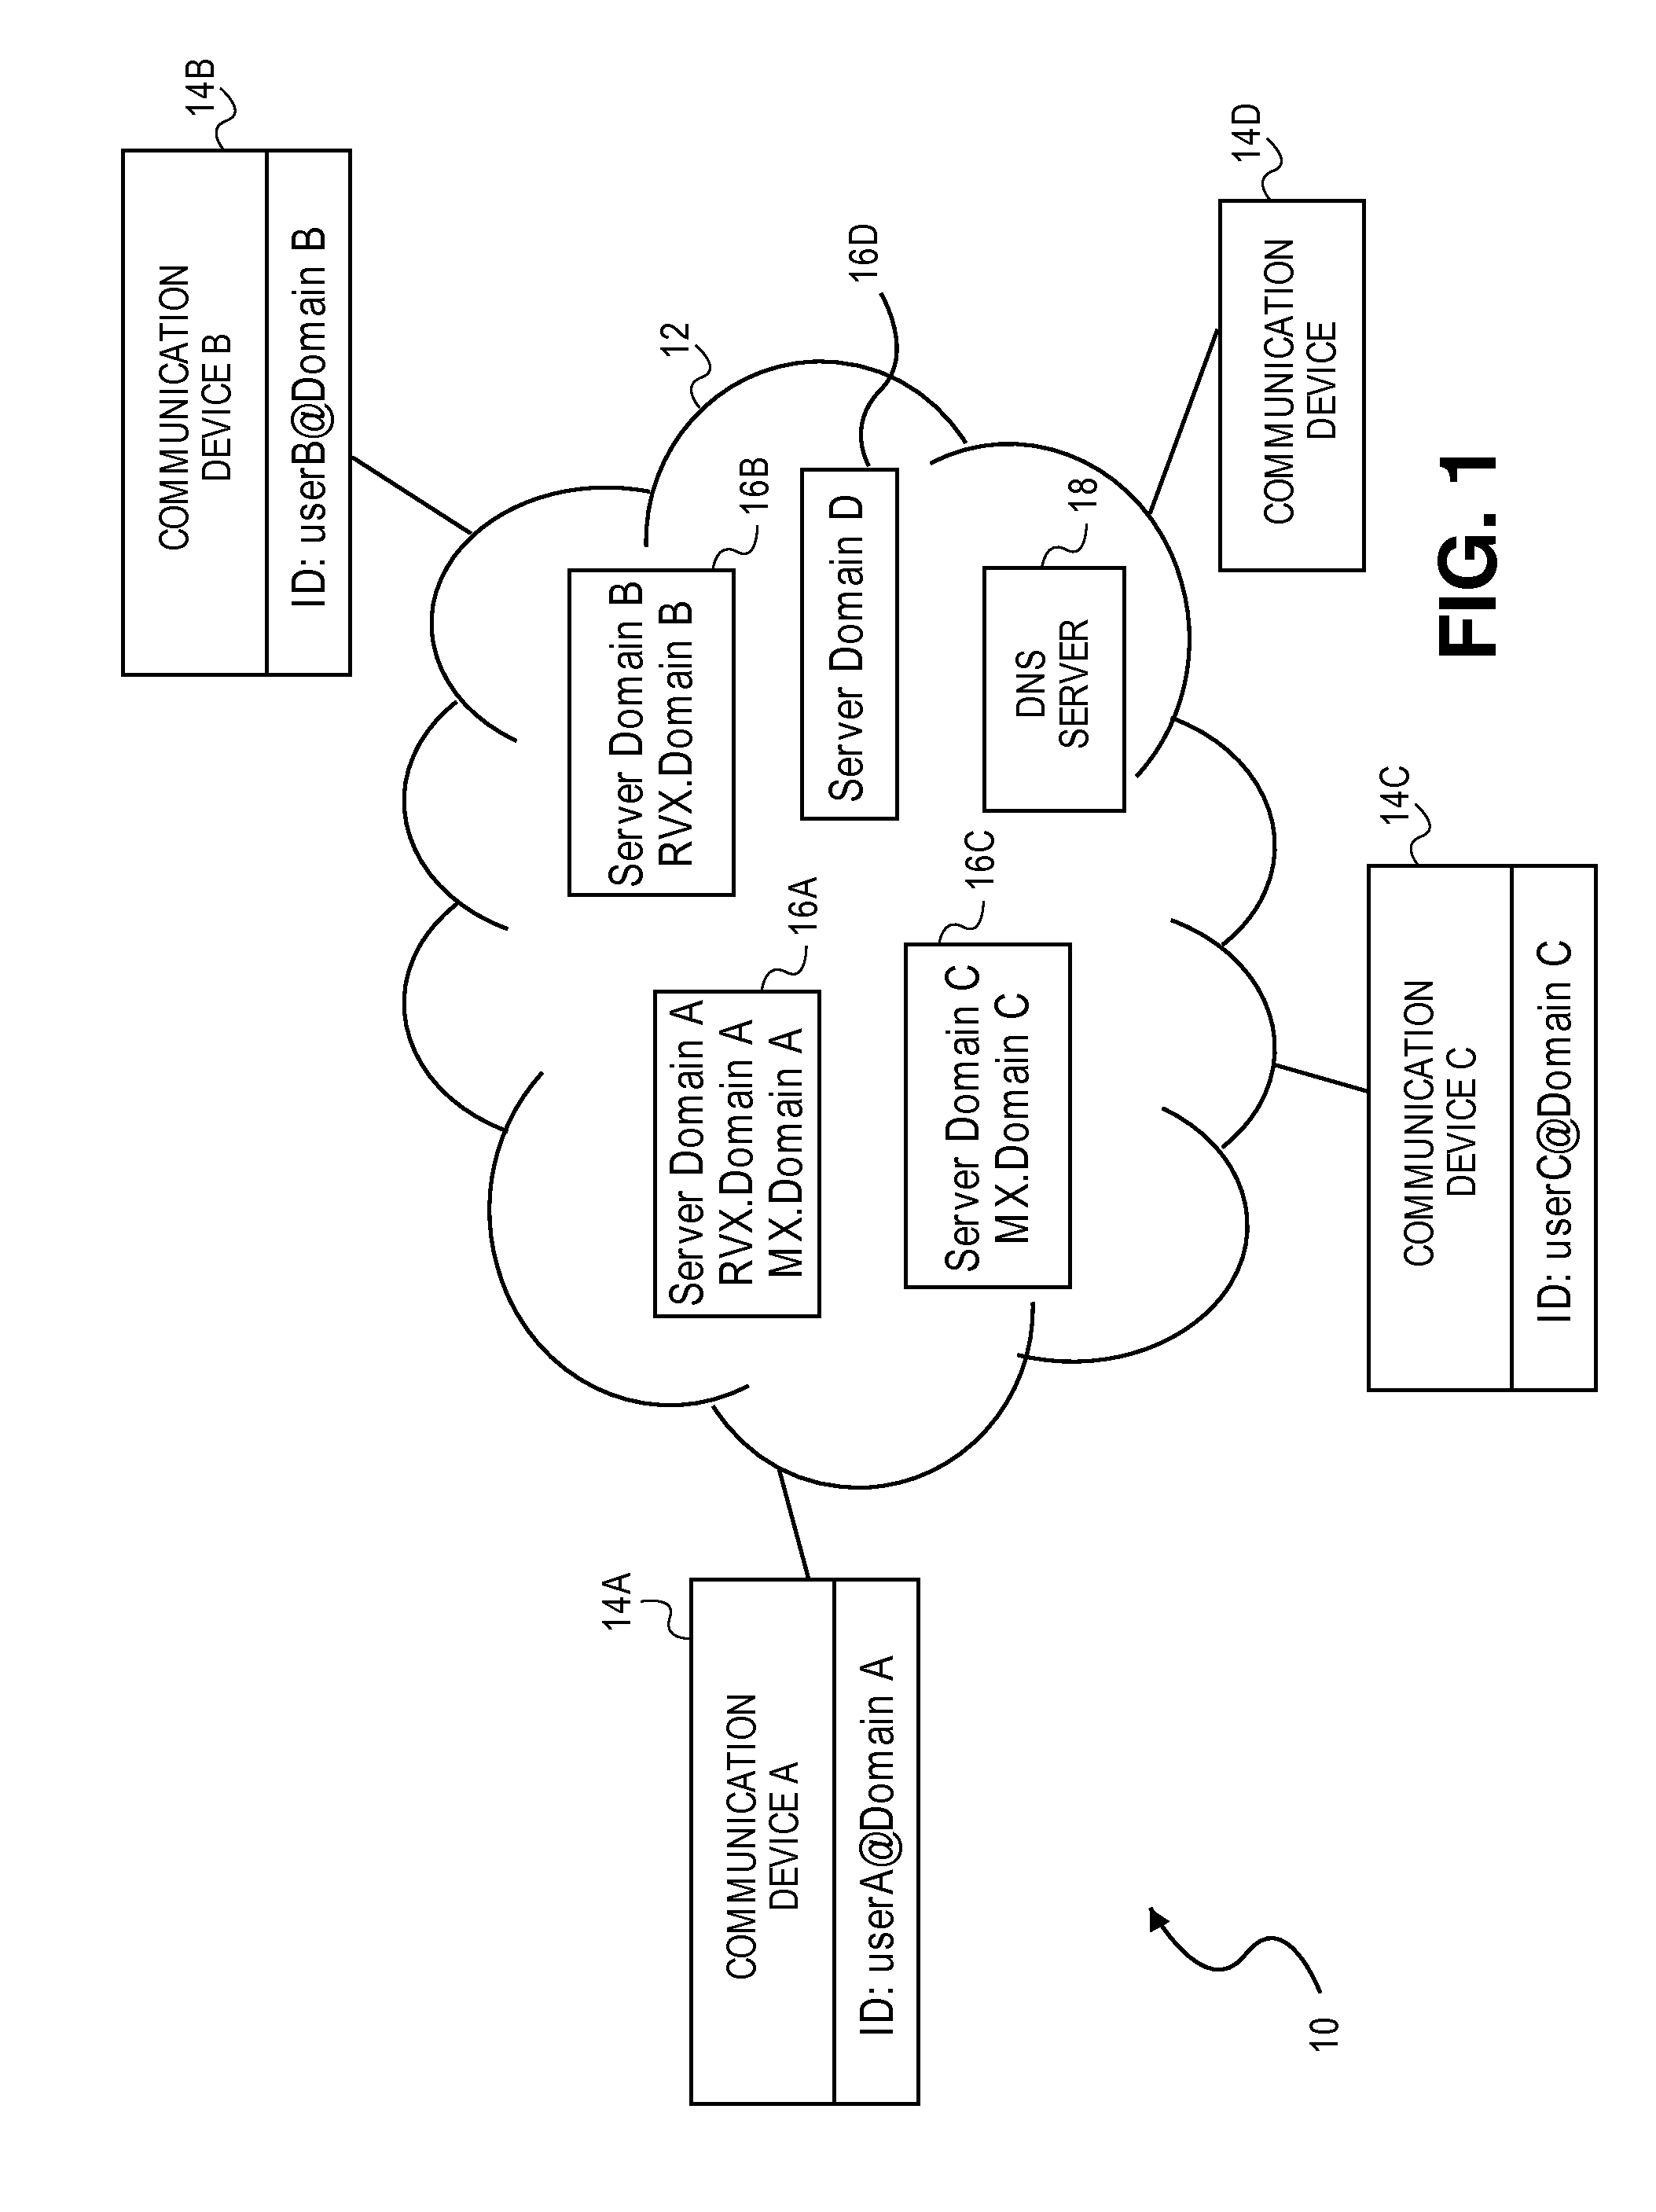 Email communication system and method for supporting real-time communication of time-based media